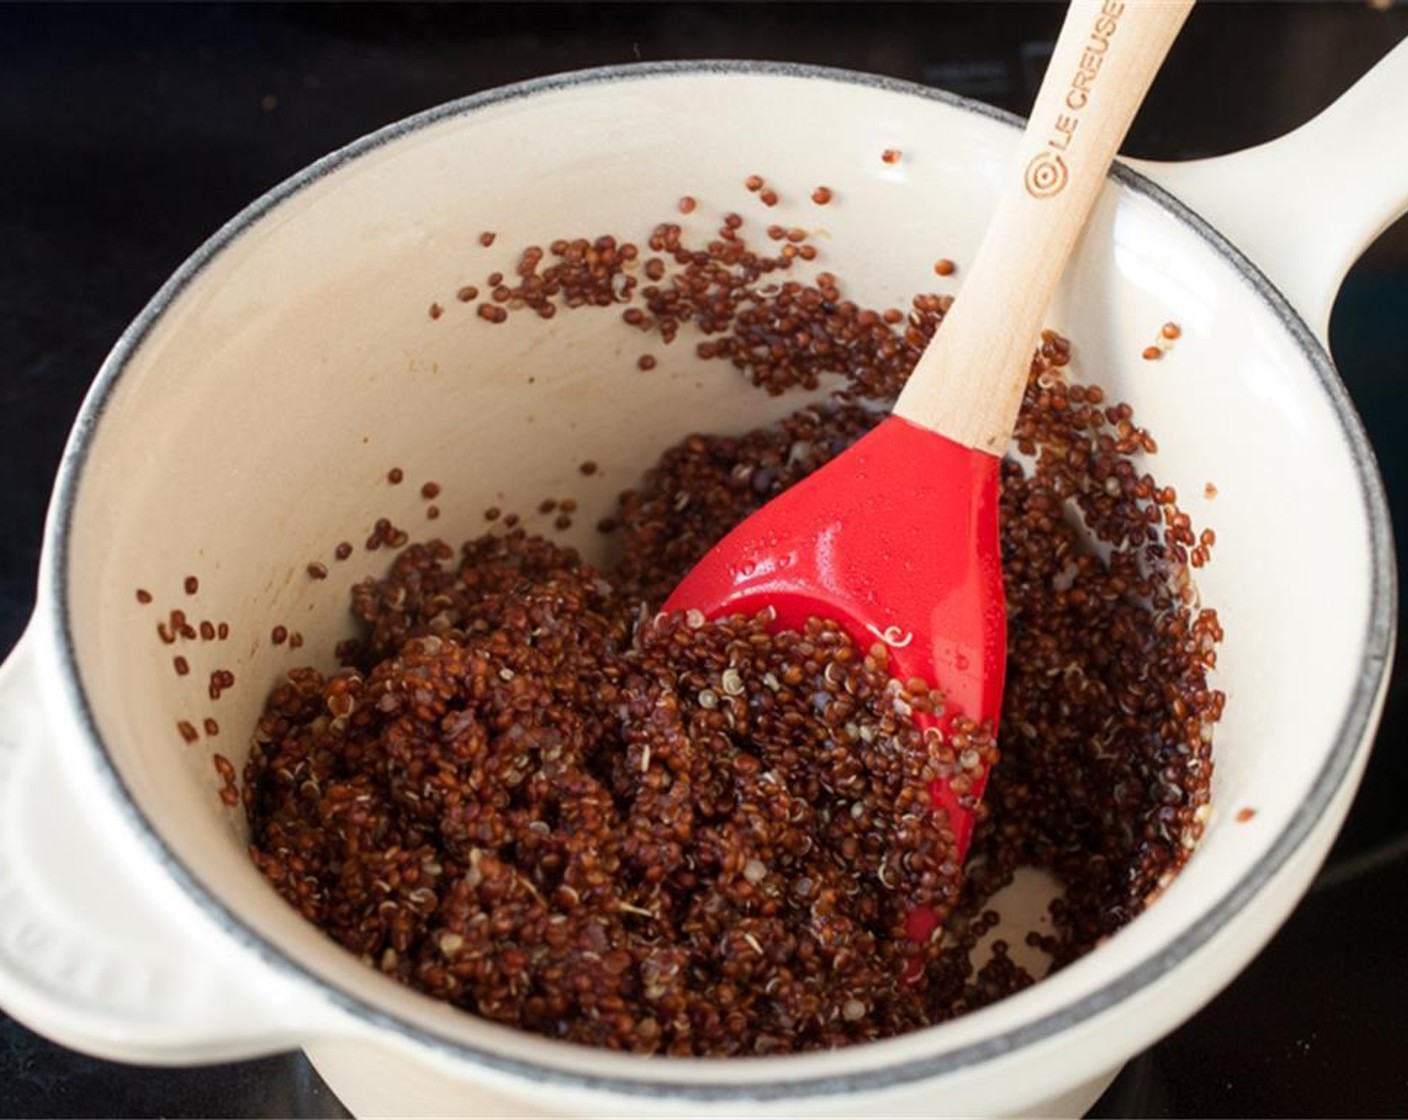 step 1 Place Red Quinoa (3/4 cup), 1 cup of water, and a pinch of salt in a small pot over high heat. Boil, then reduce heat to low and simmer until water has evaporated and quinoa is tender (about 10 minutes). Remove pot from heat, cover, and set aside.